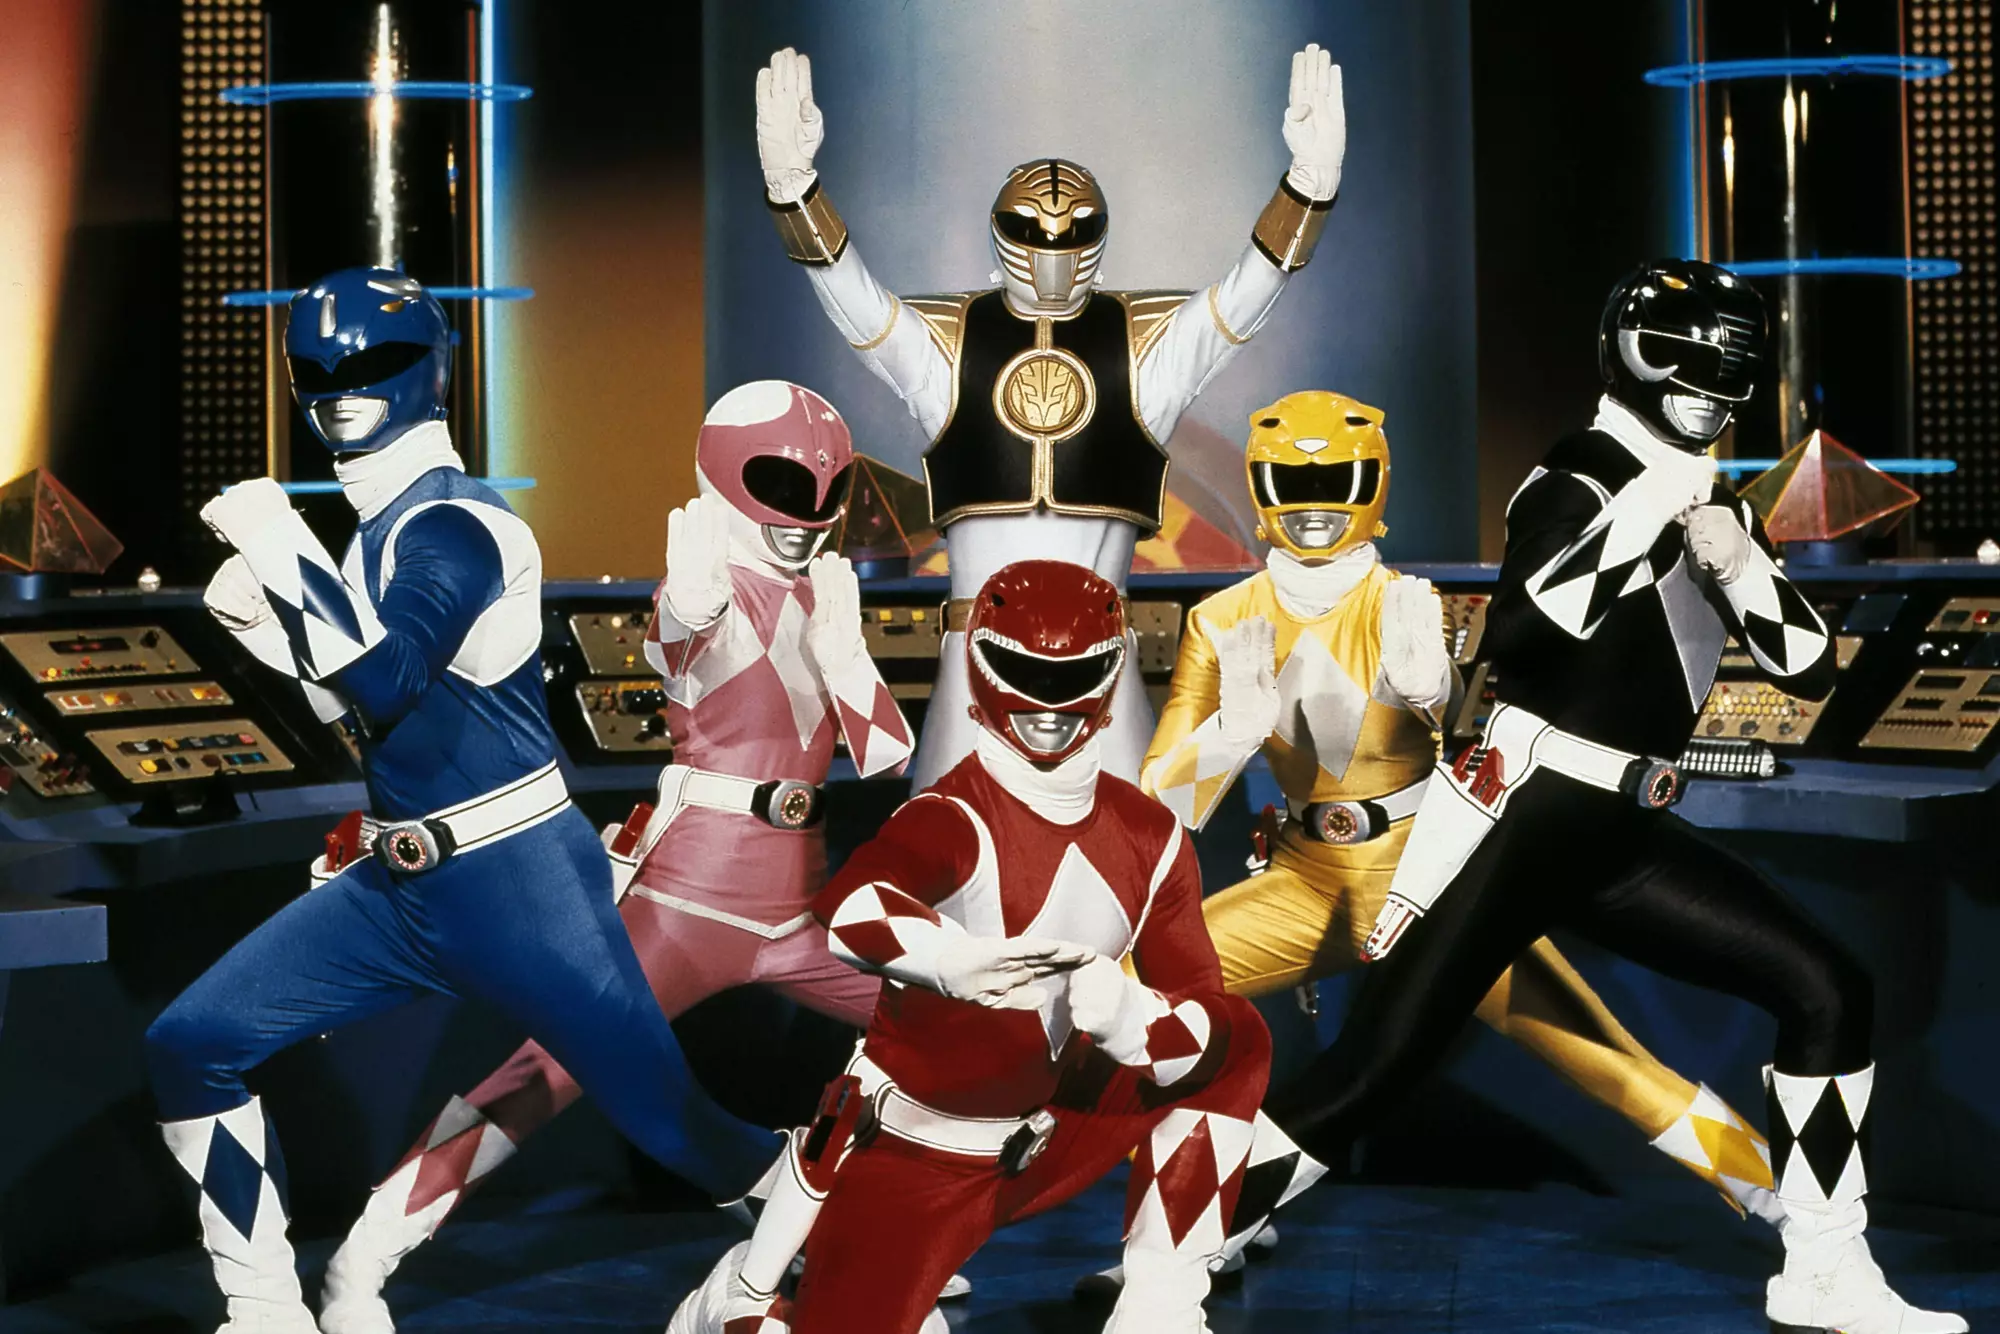 What Are The Original Power Rangers Up To Now?